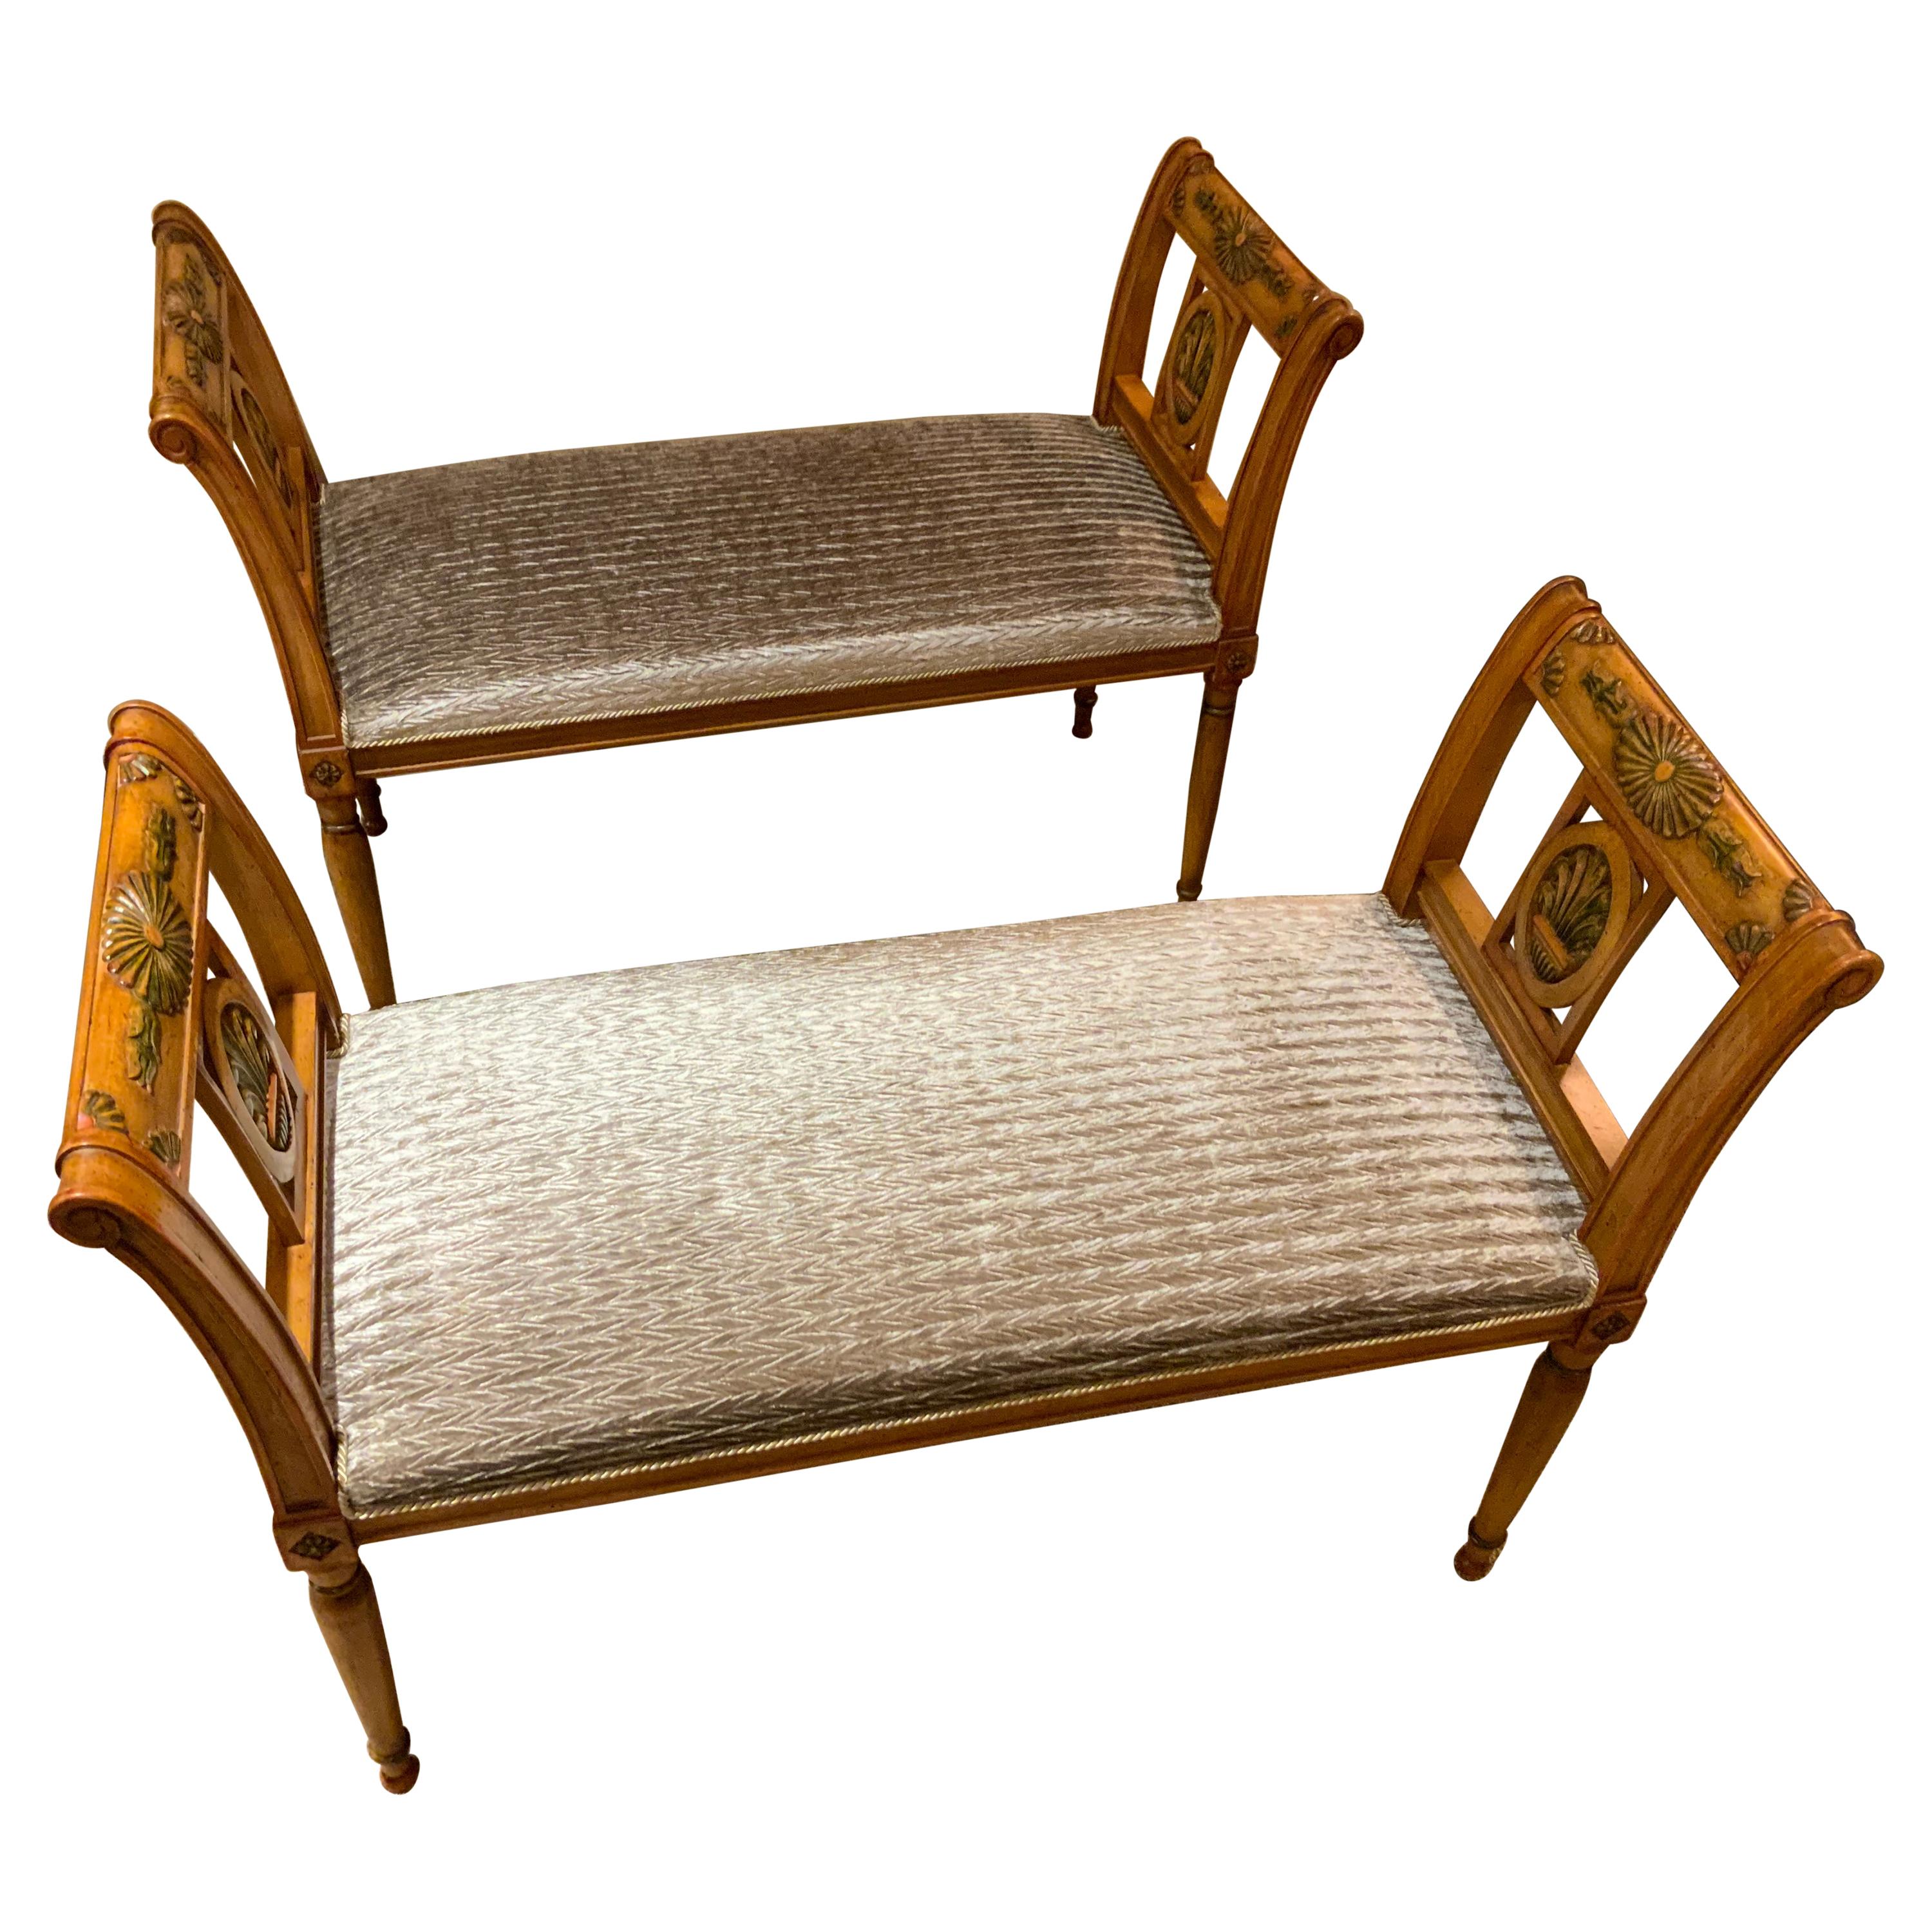 Pair of Italian Style Benches in a Honey Color with Painted Embellishments